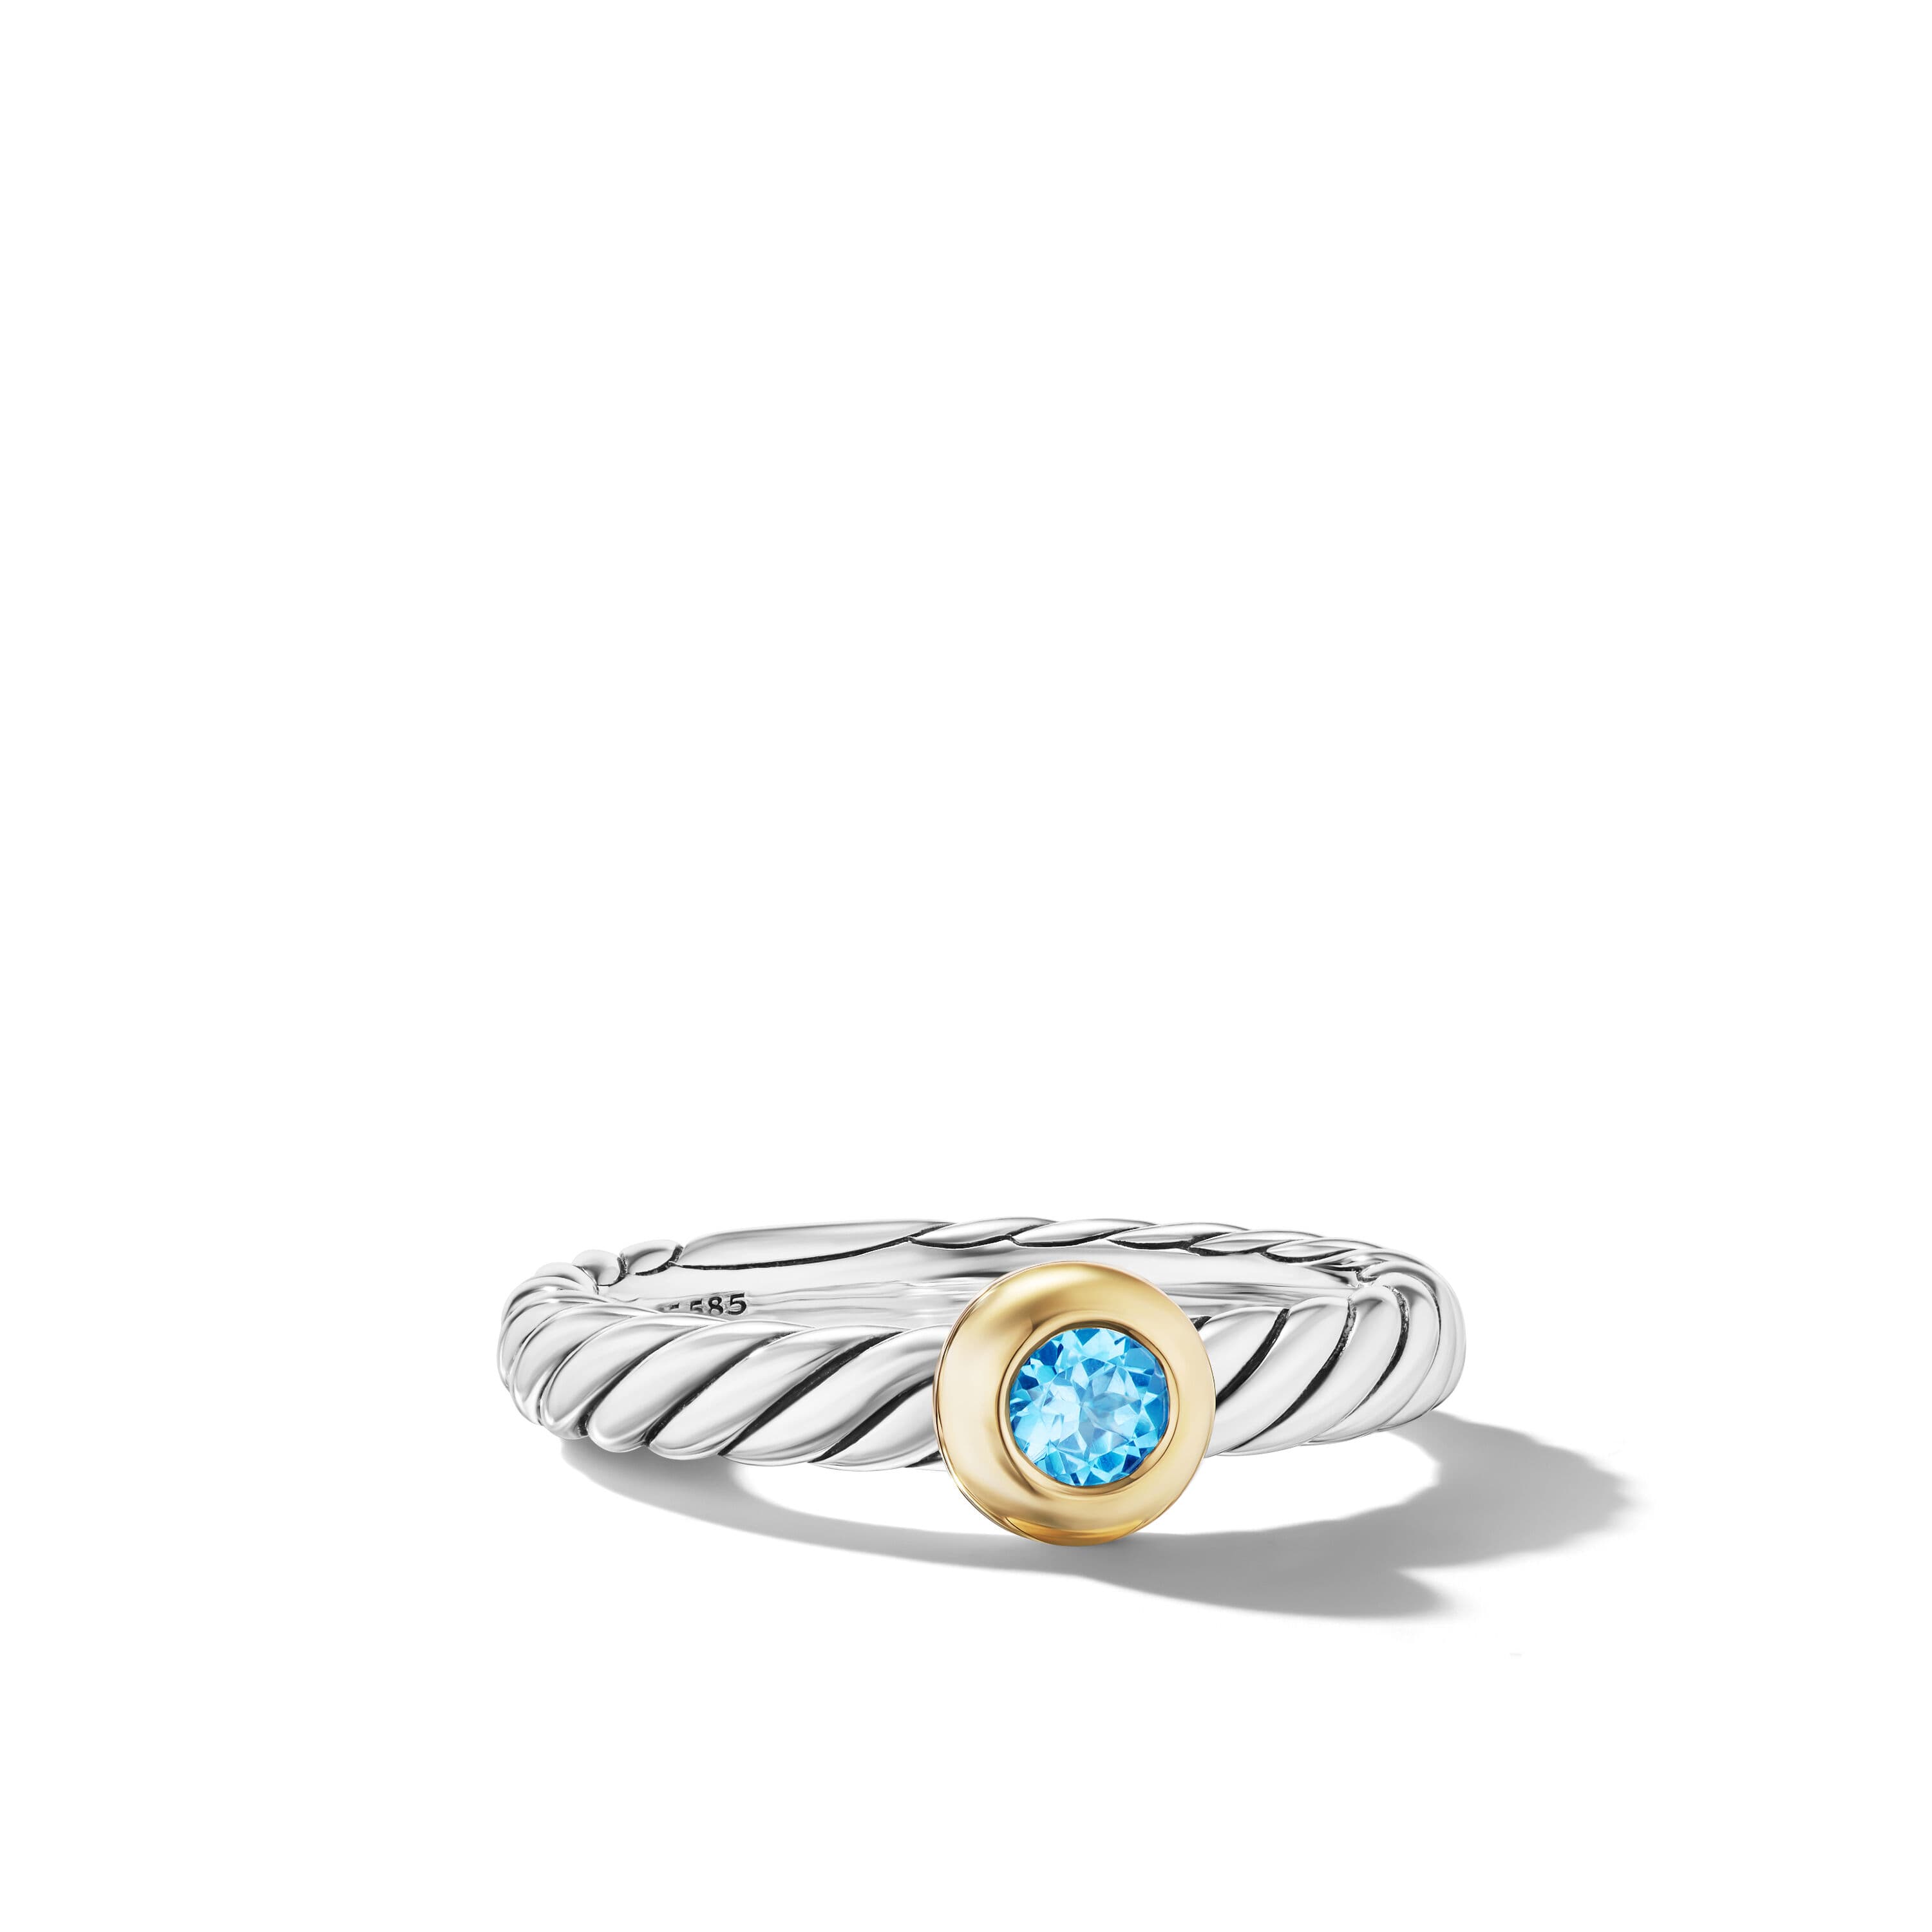 David Yurman Petite Cable Ring in Sterling Silver with 14K Yellow Gold and Blue Topaz, Size 7